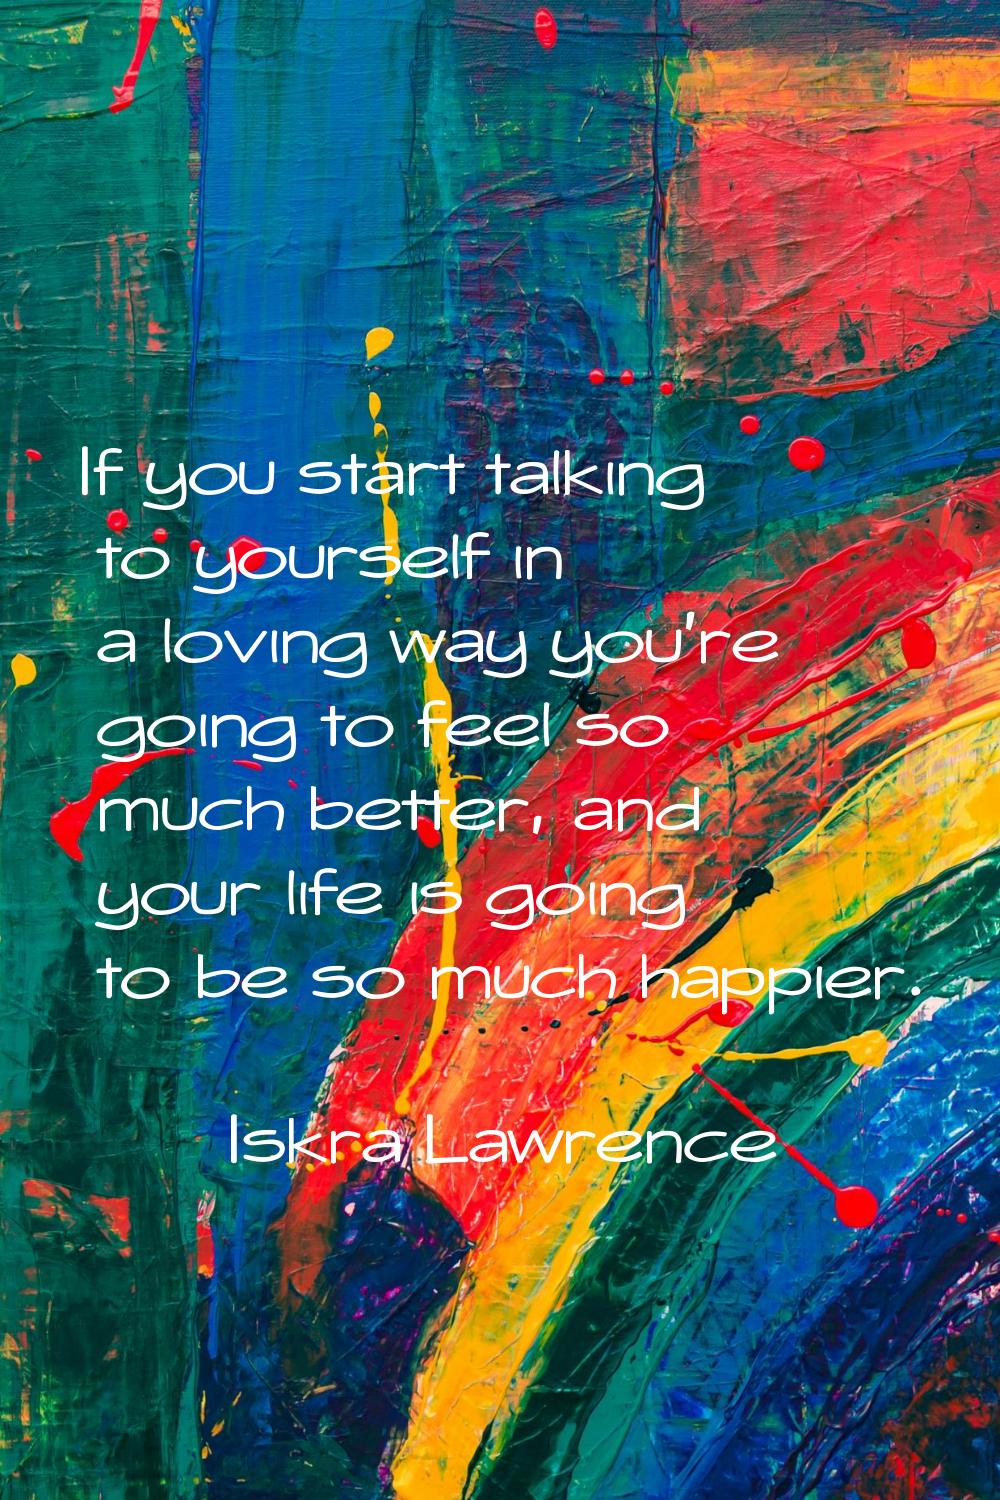 If you start talking to yourself in a loving way you're going to feel so much better, and your life